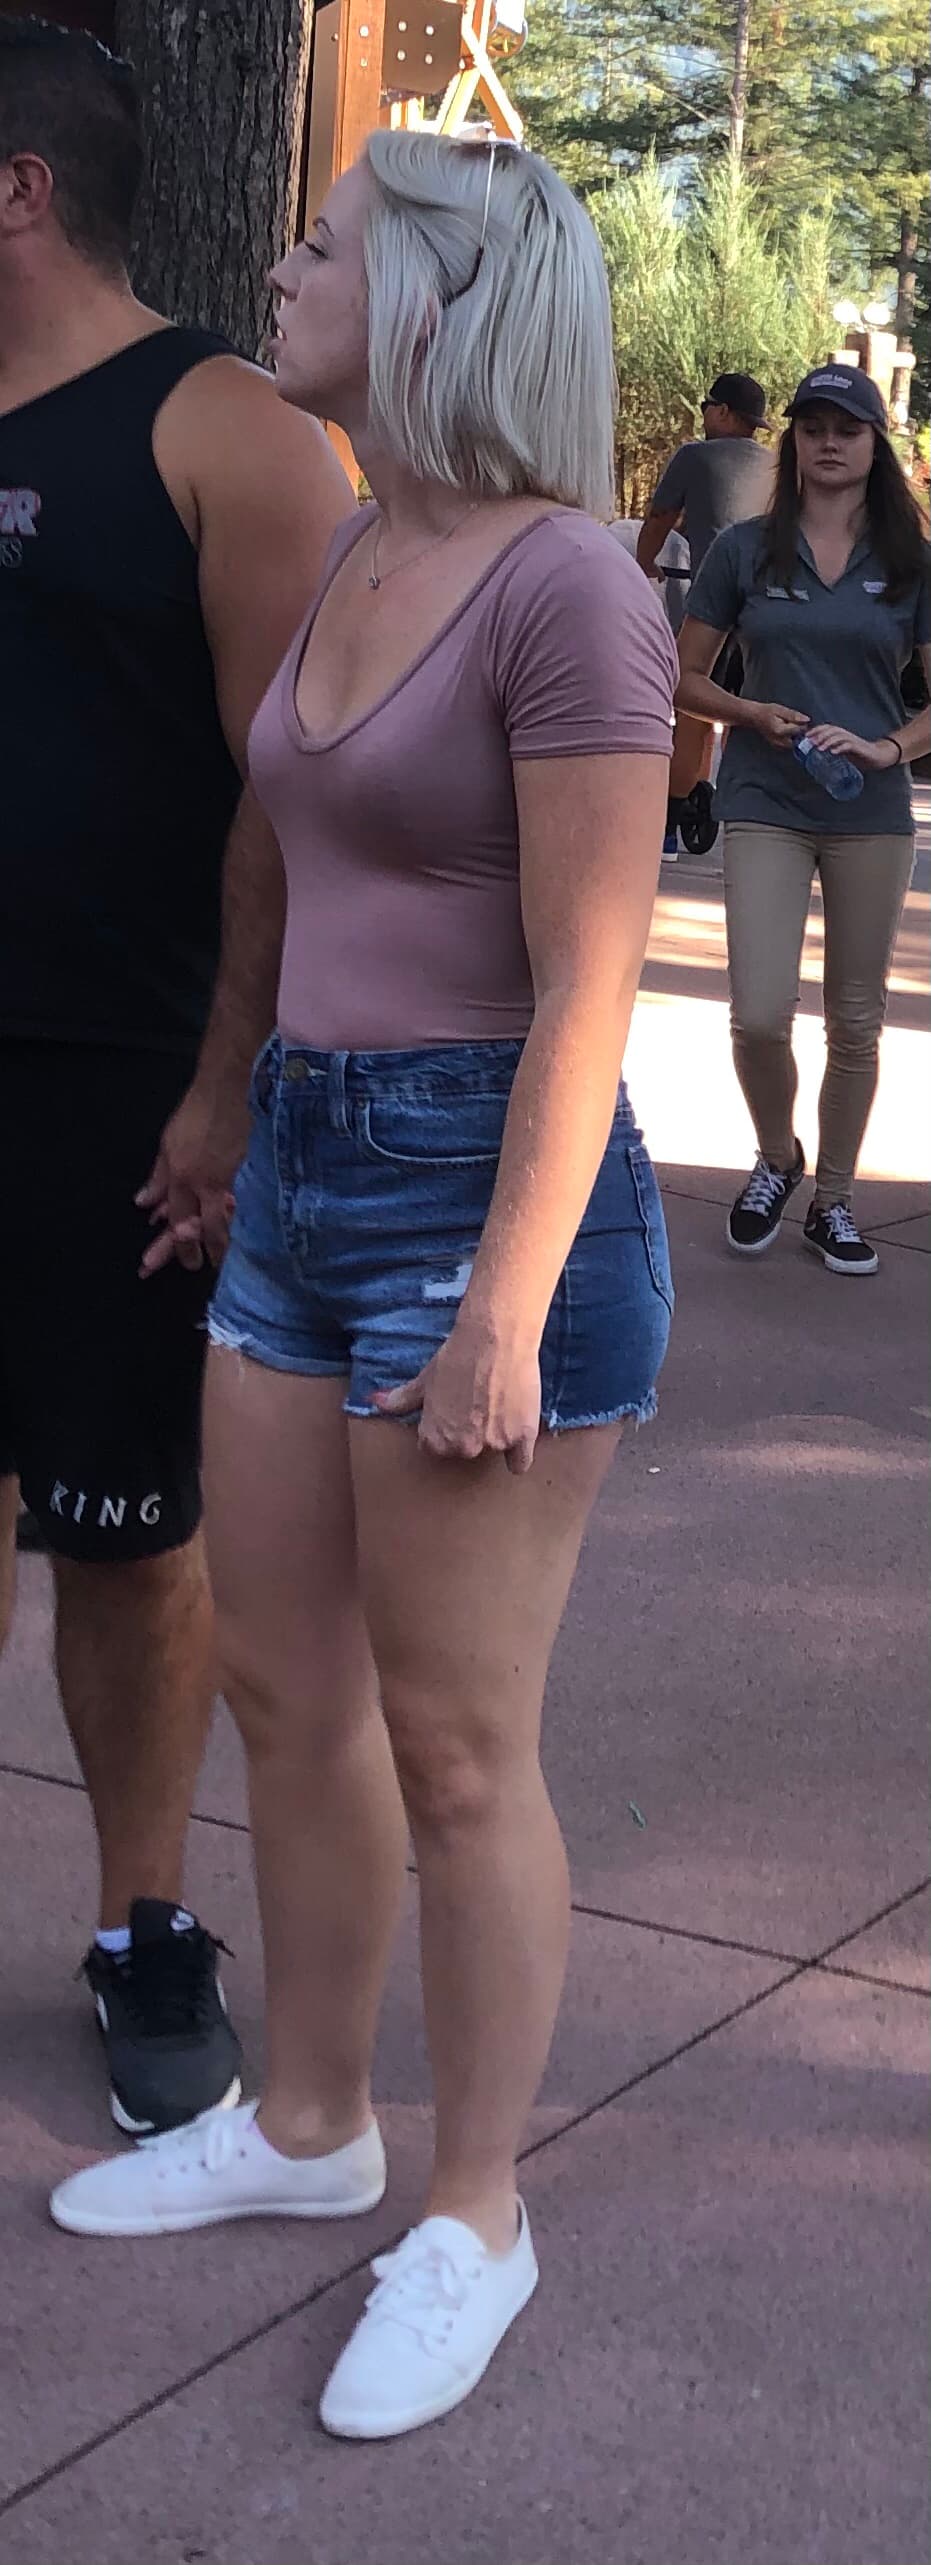 Another Fine Milf At The Amusement Park Short Shorts And Volleyball Forum